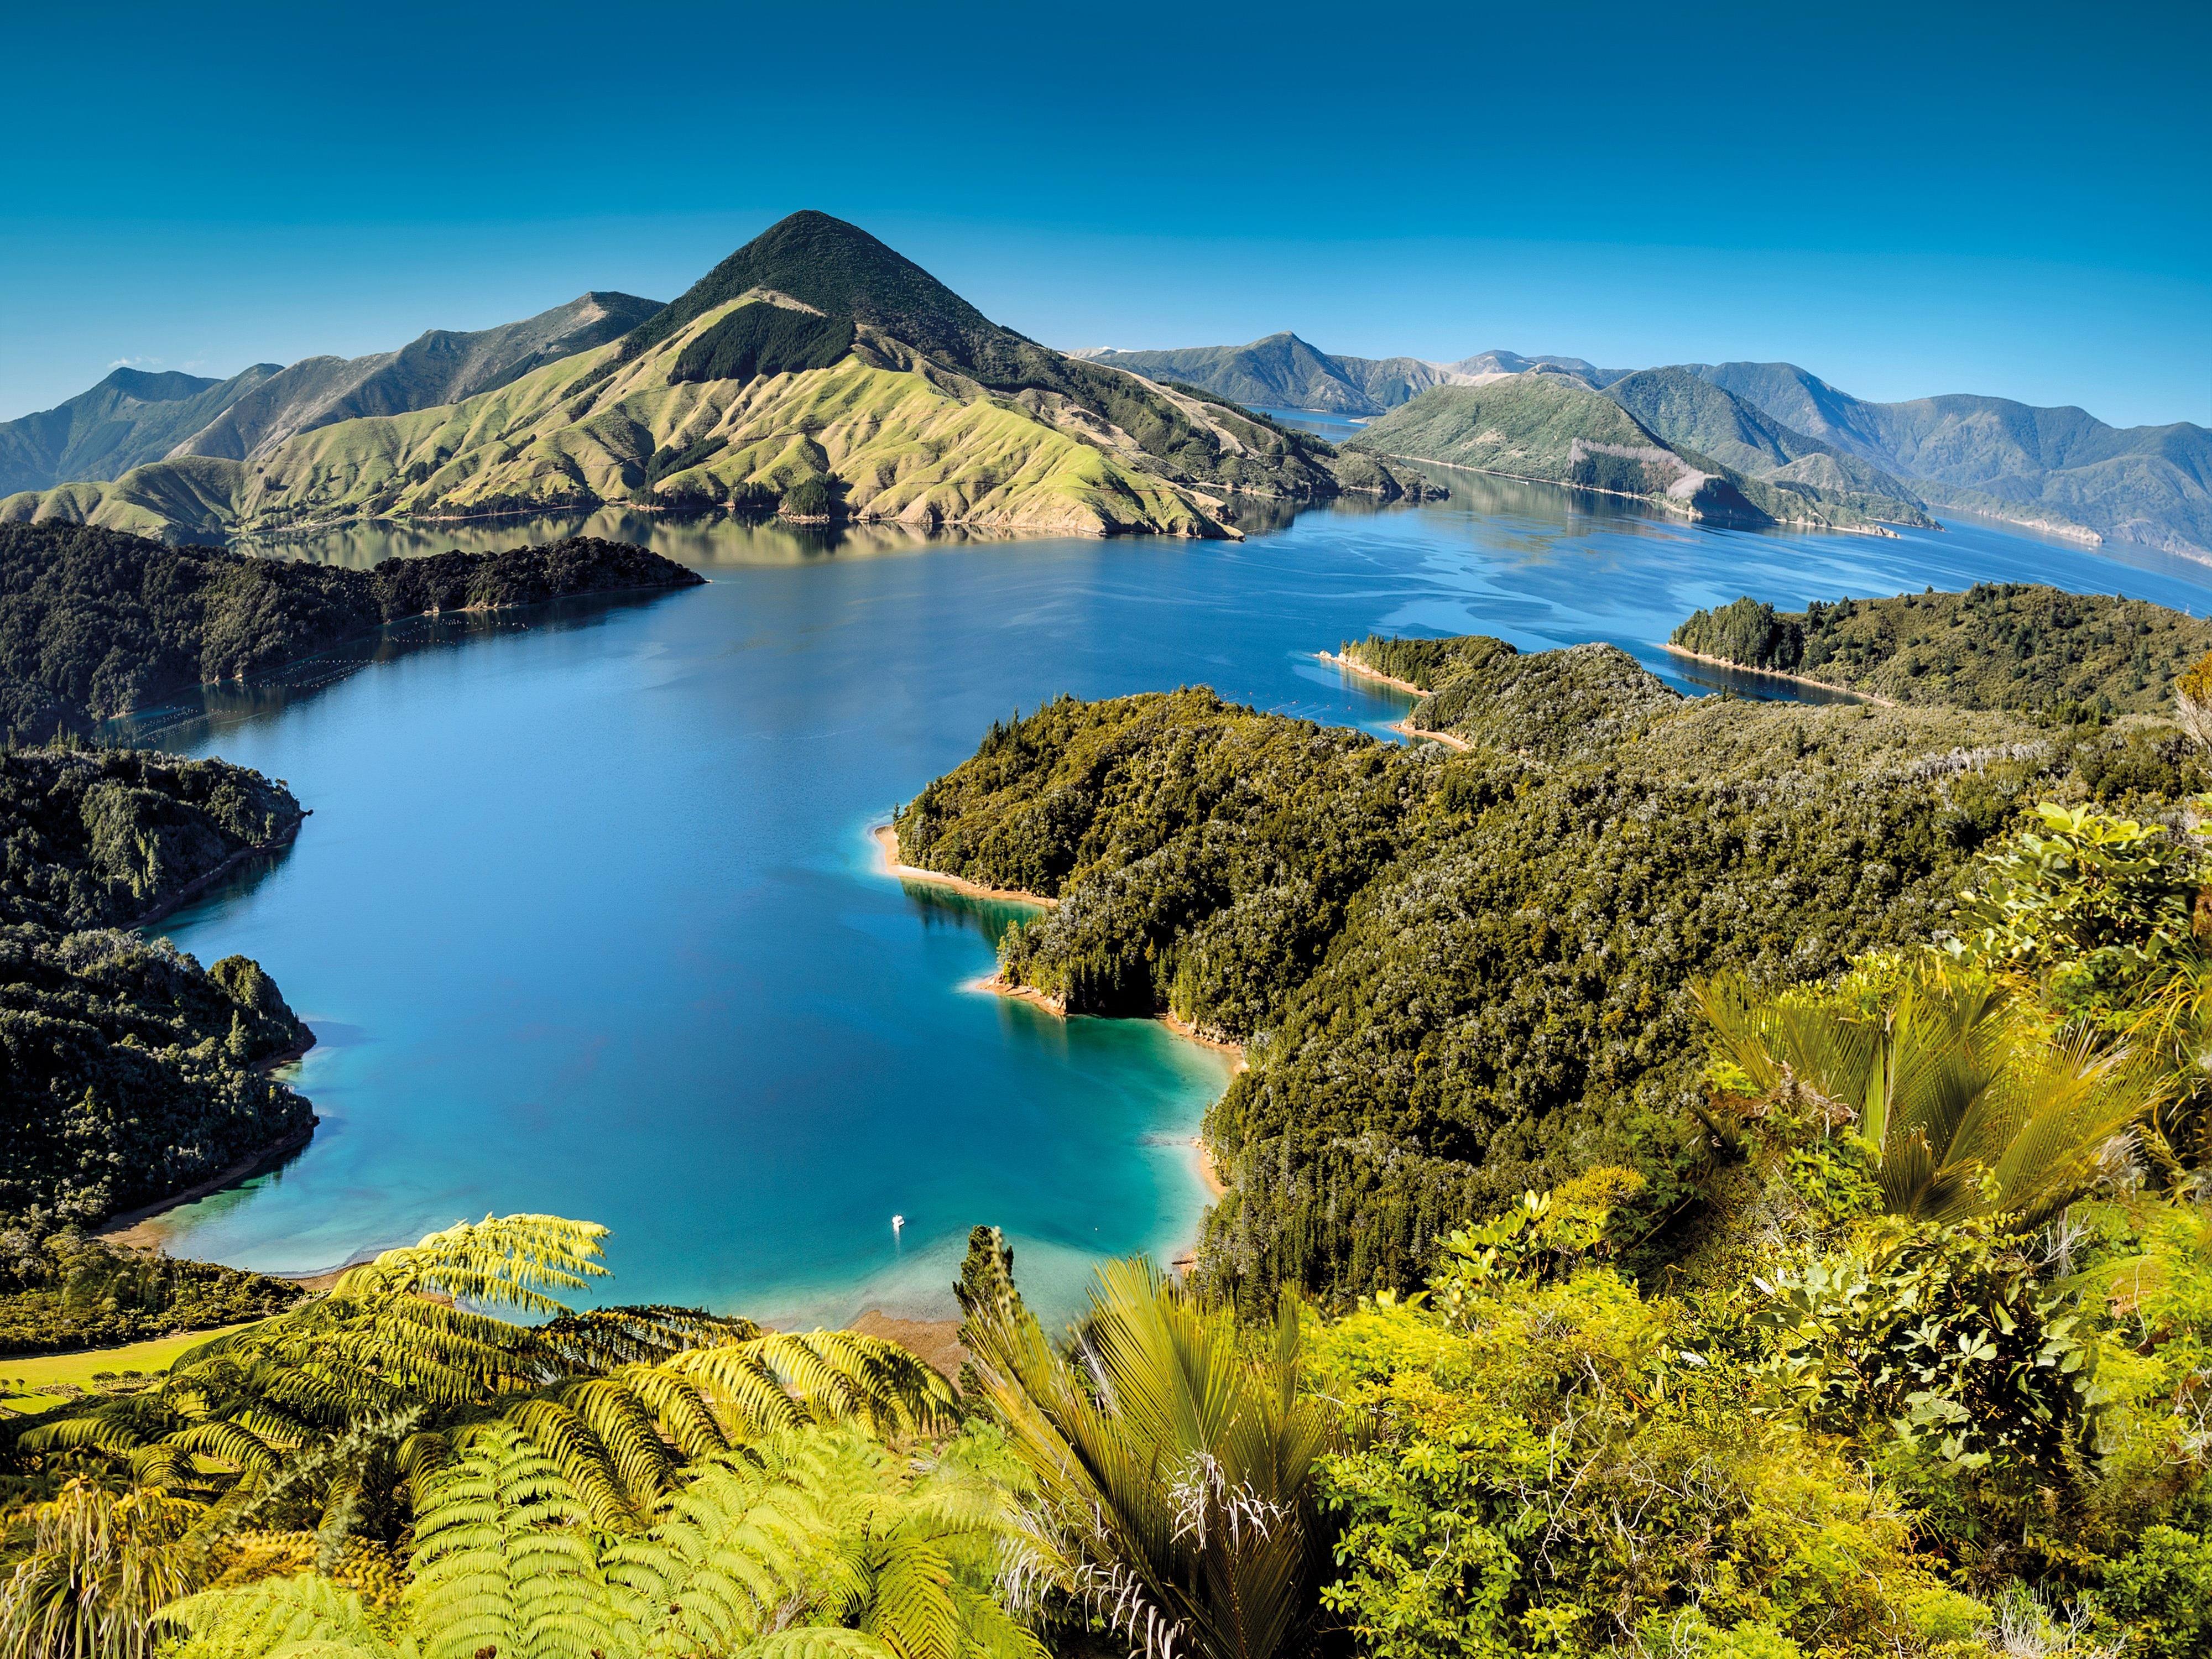 New Zealand from one of its most beautiful sides: a view of the world-famous Marlborough Sounds.